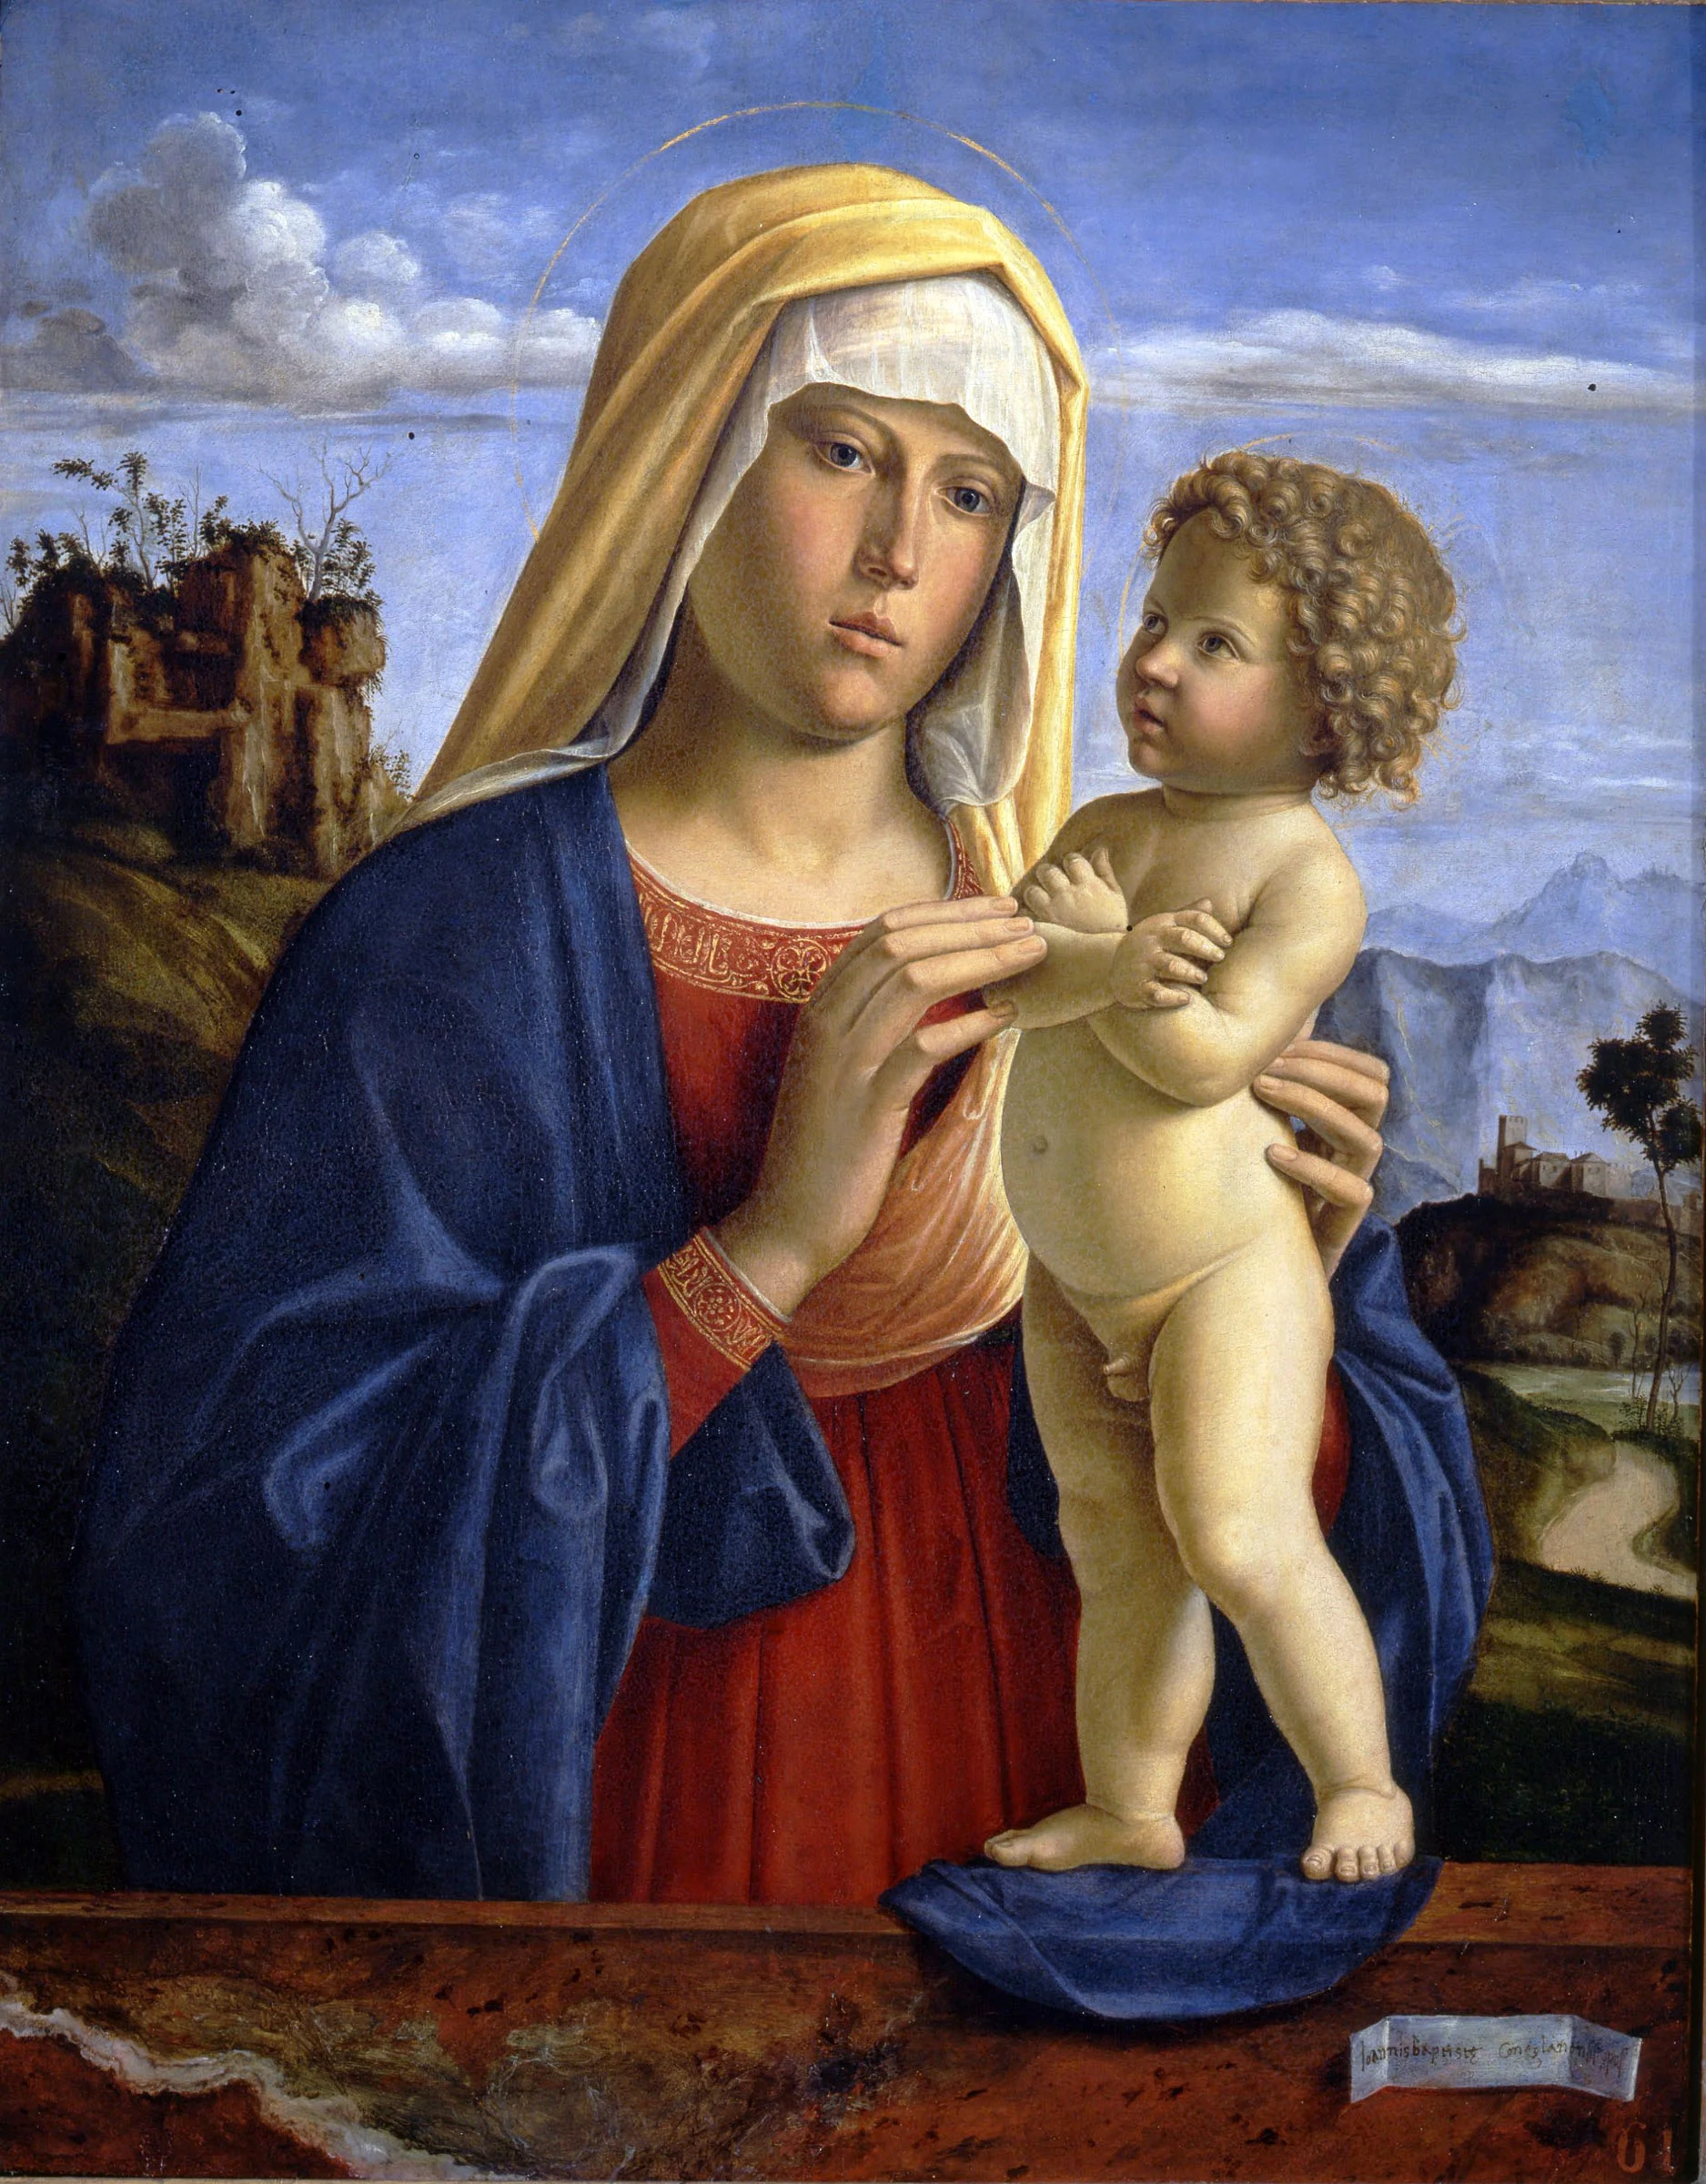 Painting detail of „Madonna and Child“ by Cima da Conegliano, showing pseudo-Arabic writing on the stitching, 1495